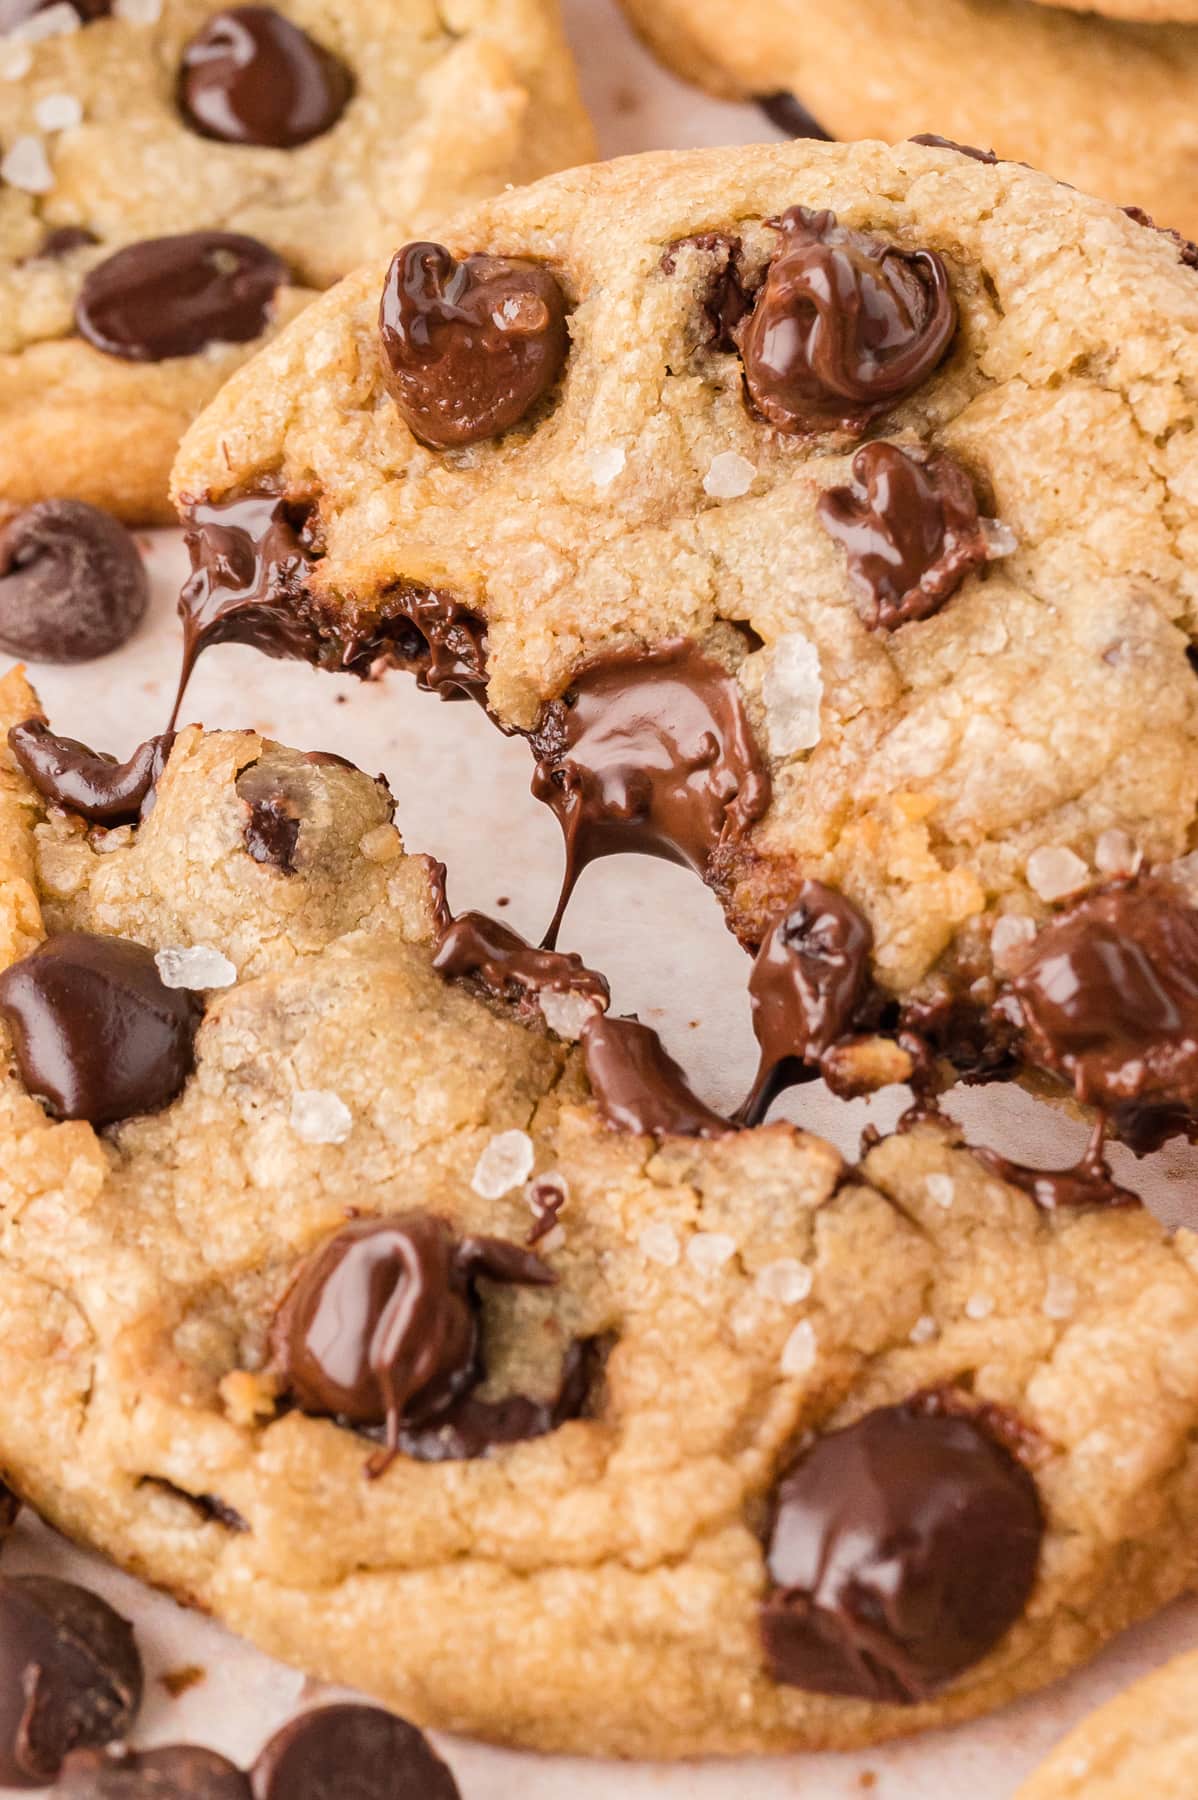 A brown butter chocolate chip cookie broken in half to show the gooey chocolate